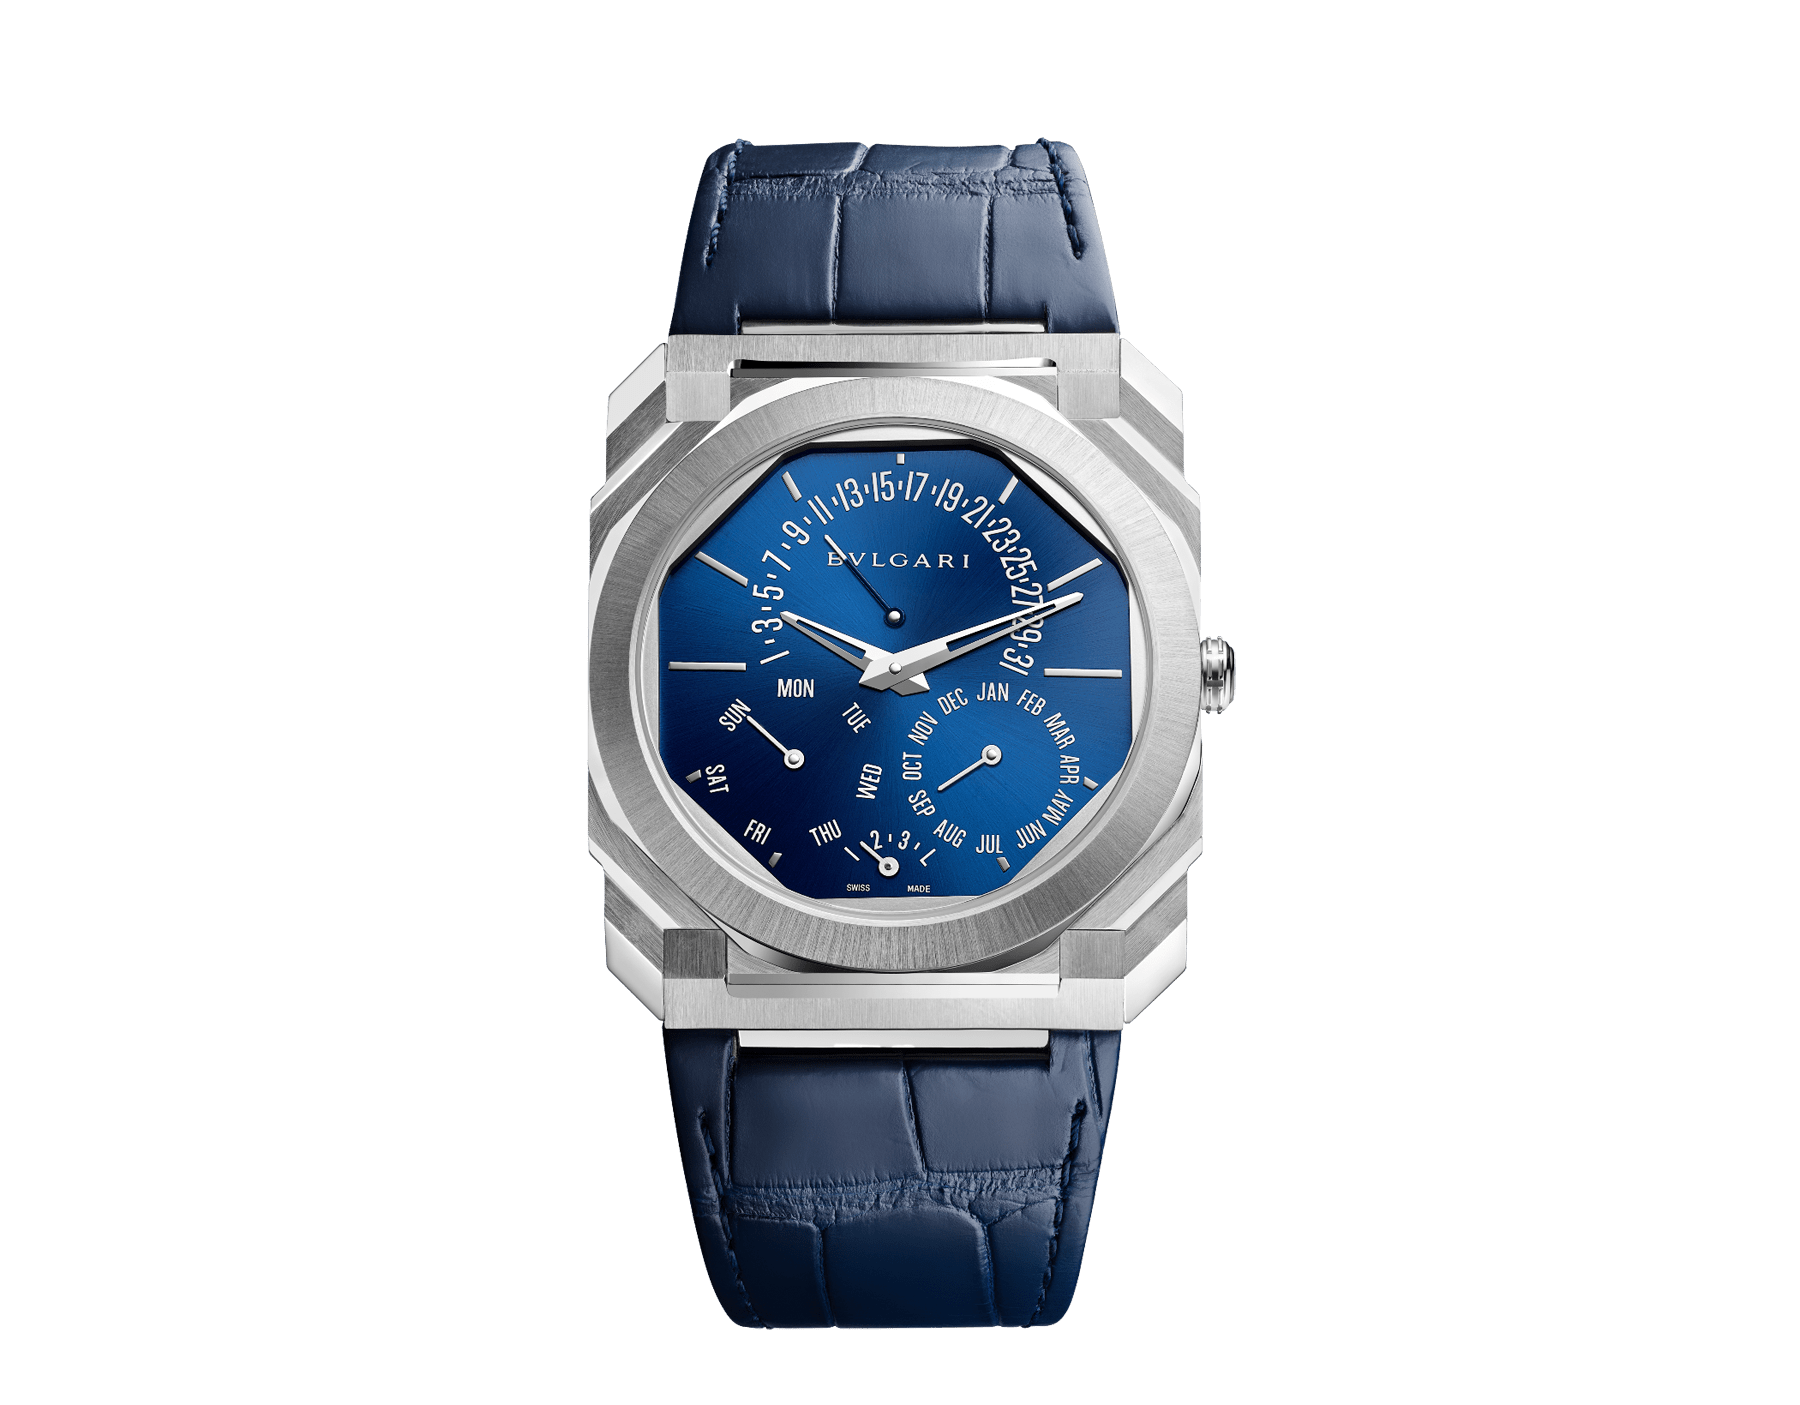 The Octo Finissimo Perpetual Calendar Haute Horlogerie watch features an extra-thin mechanical manufacture movement with automatic winding, hour, minutes, retrograde date, day, month and retrograde leap year, satin-polished platinum case, transparent case back, gradient blue lacquered dial and blue alligator bracelet with platinum pin buckle. Water-resistant up to 30 metres. 103463 image 1